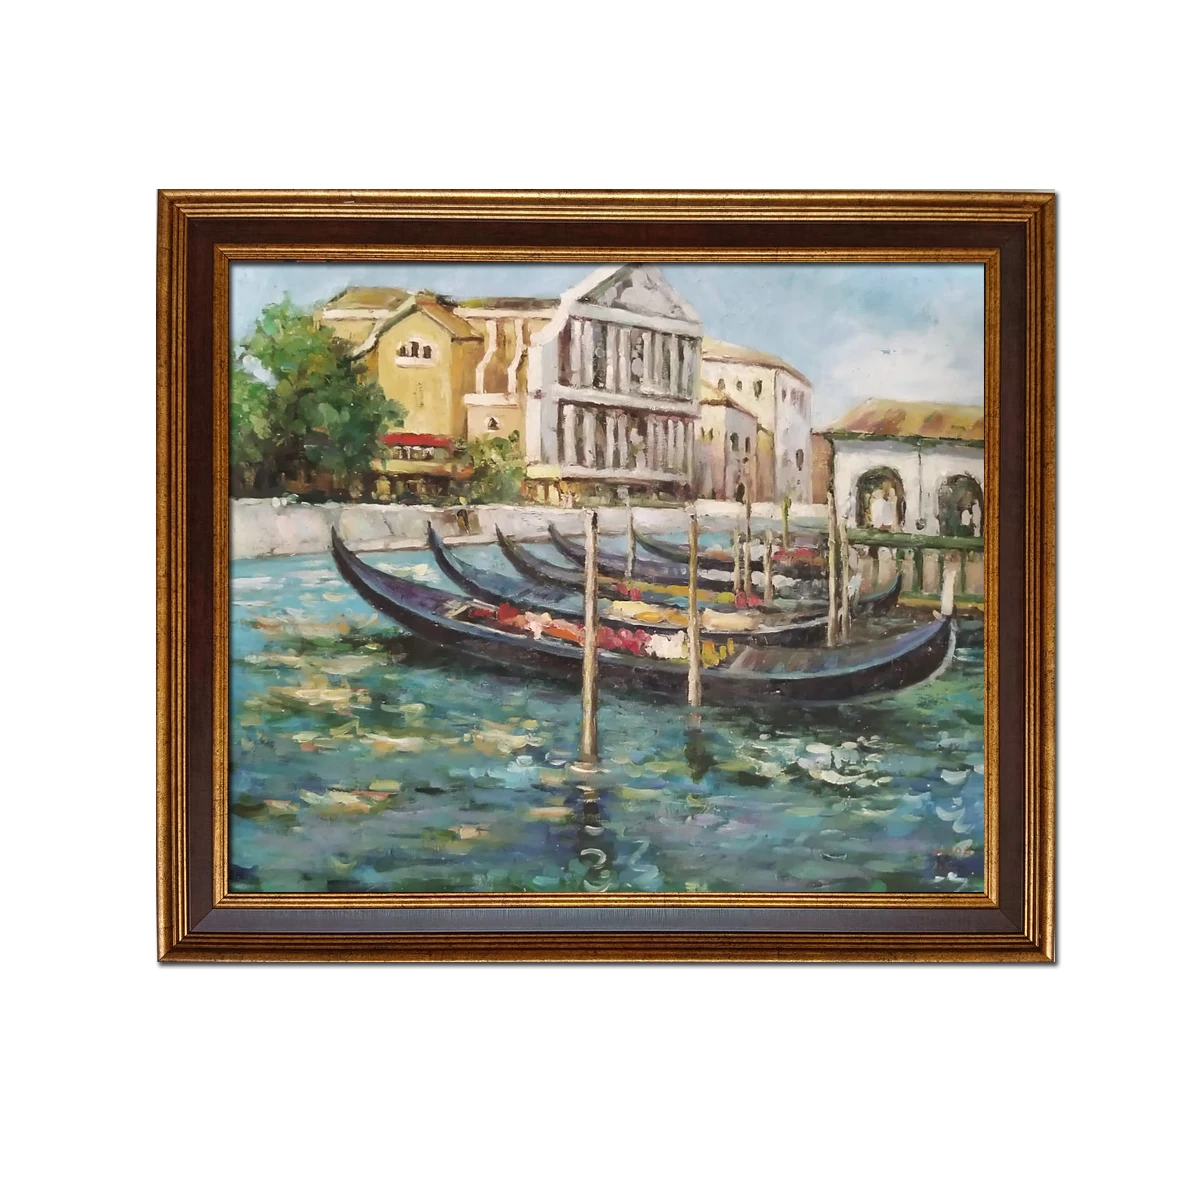 

Golden Framed-Modern Home Decor Wall Art Hand painted Classical IMPRESSIONISM Venice Boat Landscape Oil Painting on Canvas